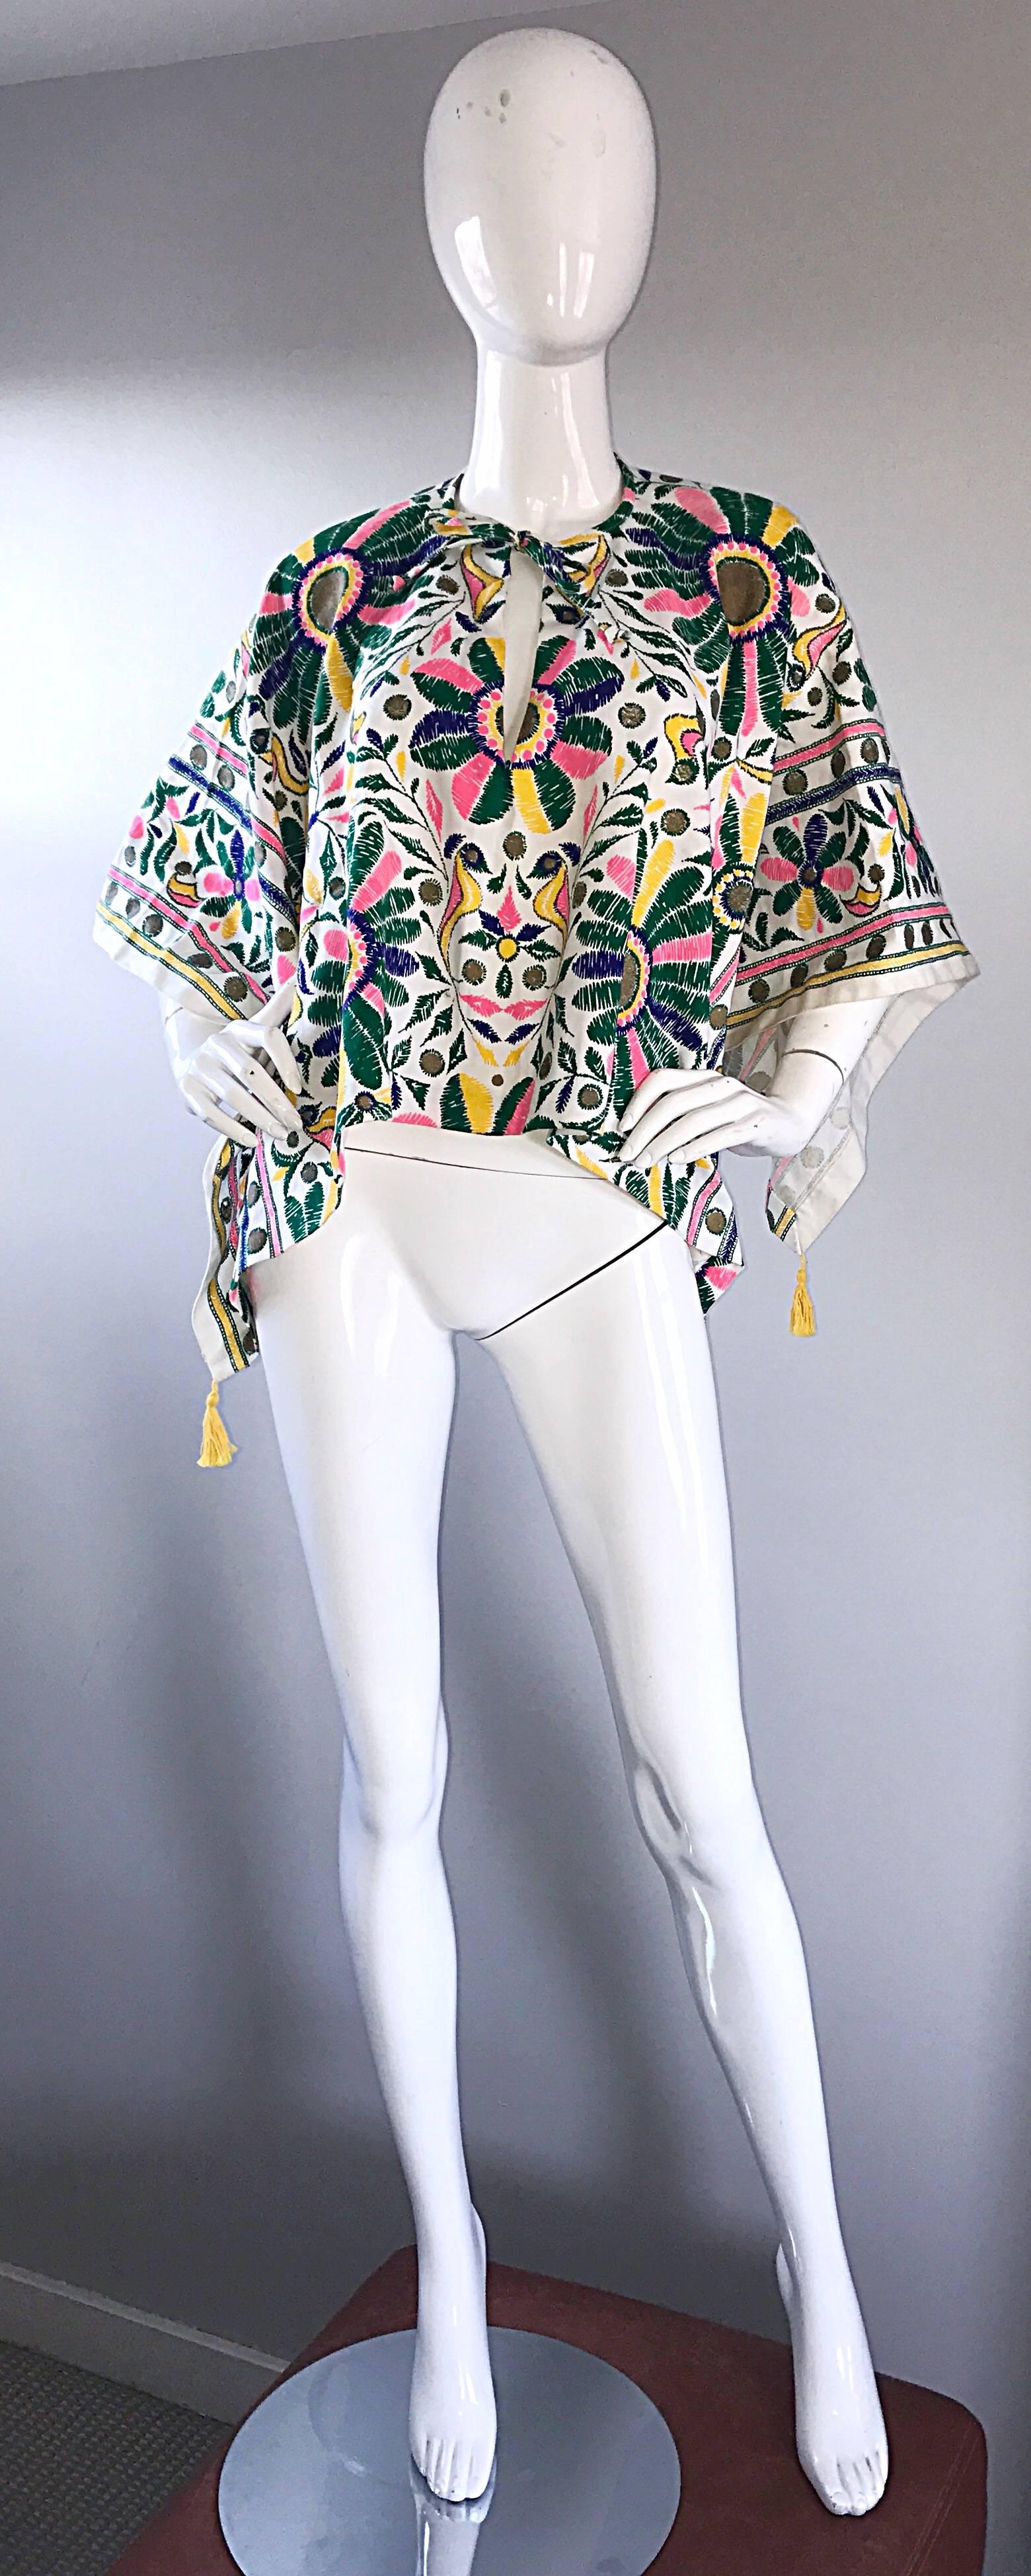 Incredible vintage 1970s hand painted cotton boho poncho / cape! Features colorful birds and flowers throughout in vibrant shades of pink, green, yellow, and blue. Keyhole neck at front center neck, with tie closure. Great with jeans, shorts,